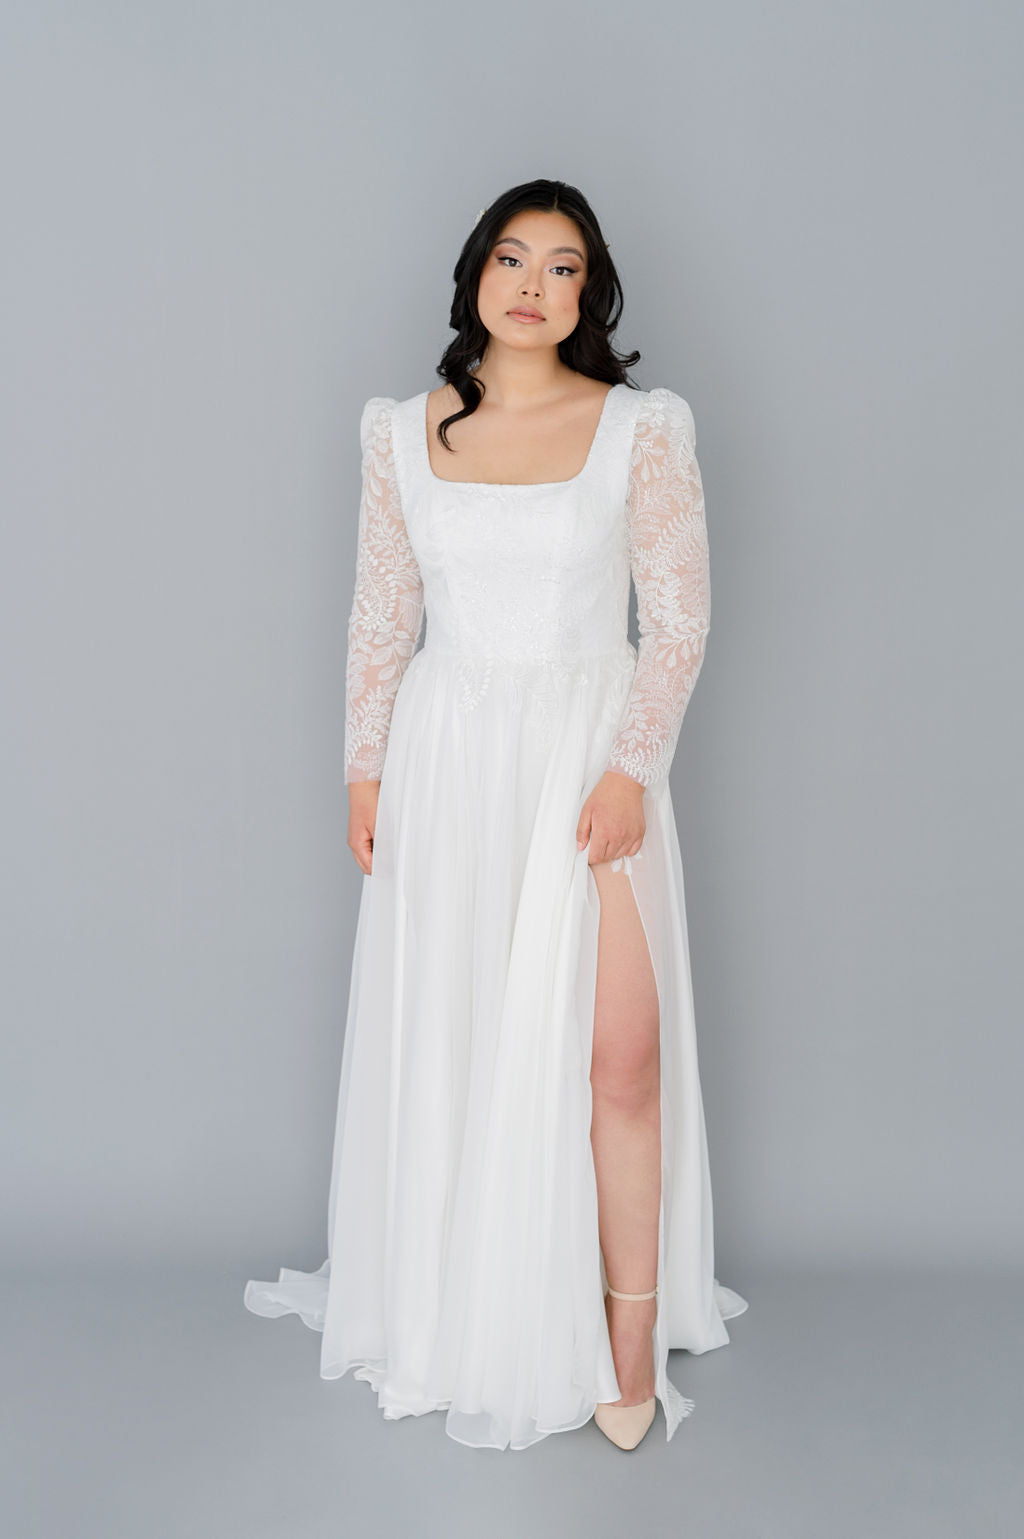 Romantic chiffon wedding dress with a square neckline. Full chiffon skirt, long lace sleeves, pearl buttons. Custom made by Catherine Langlois, Toronto.